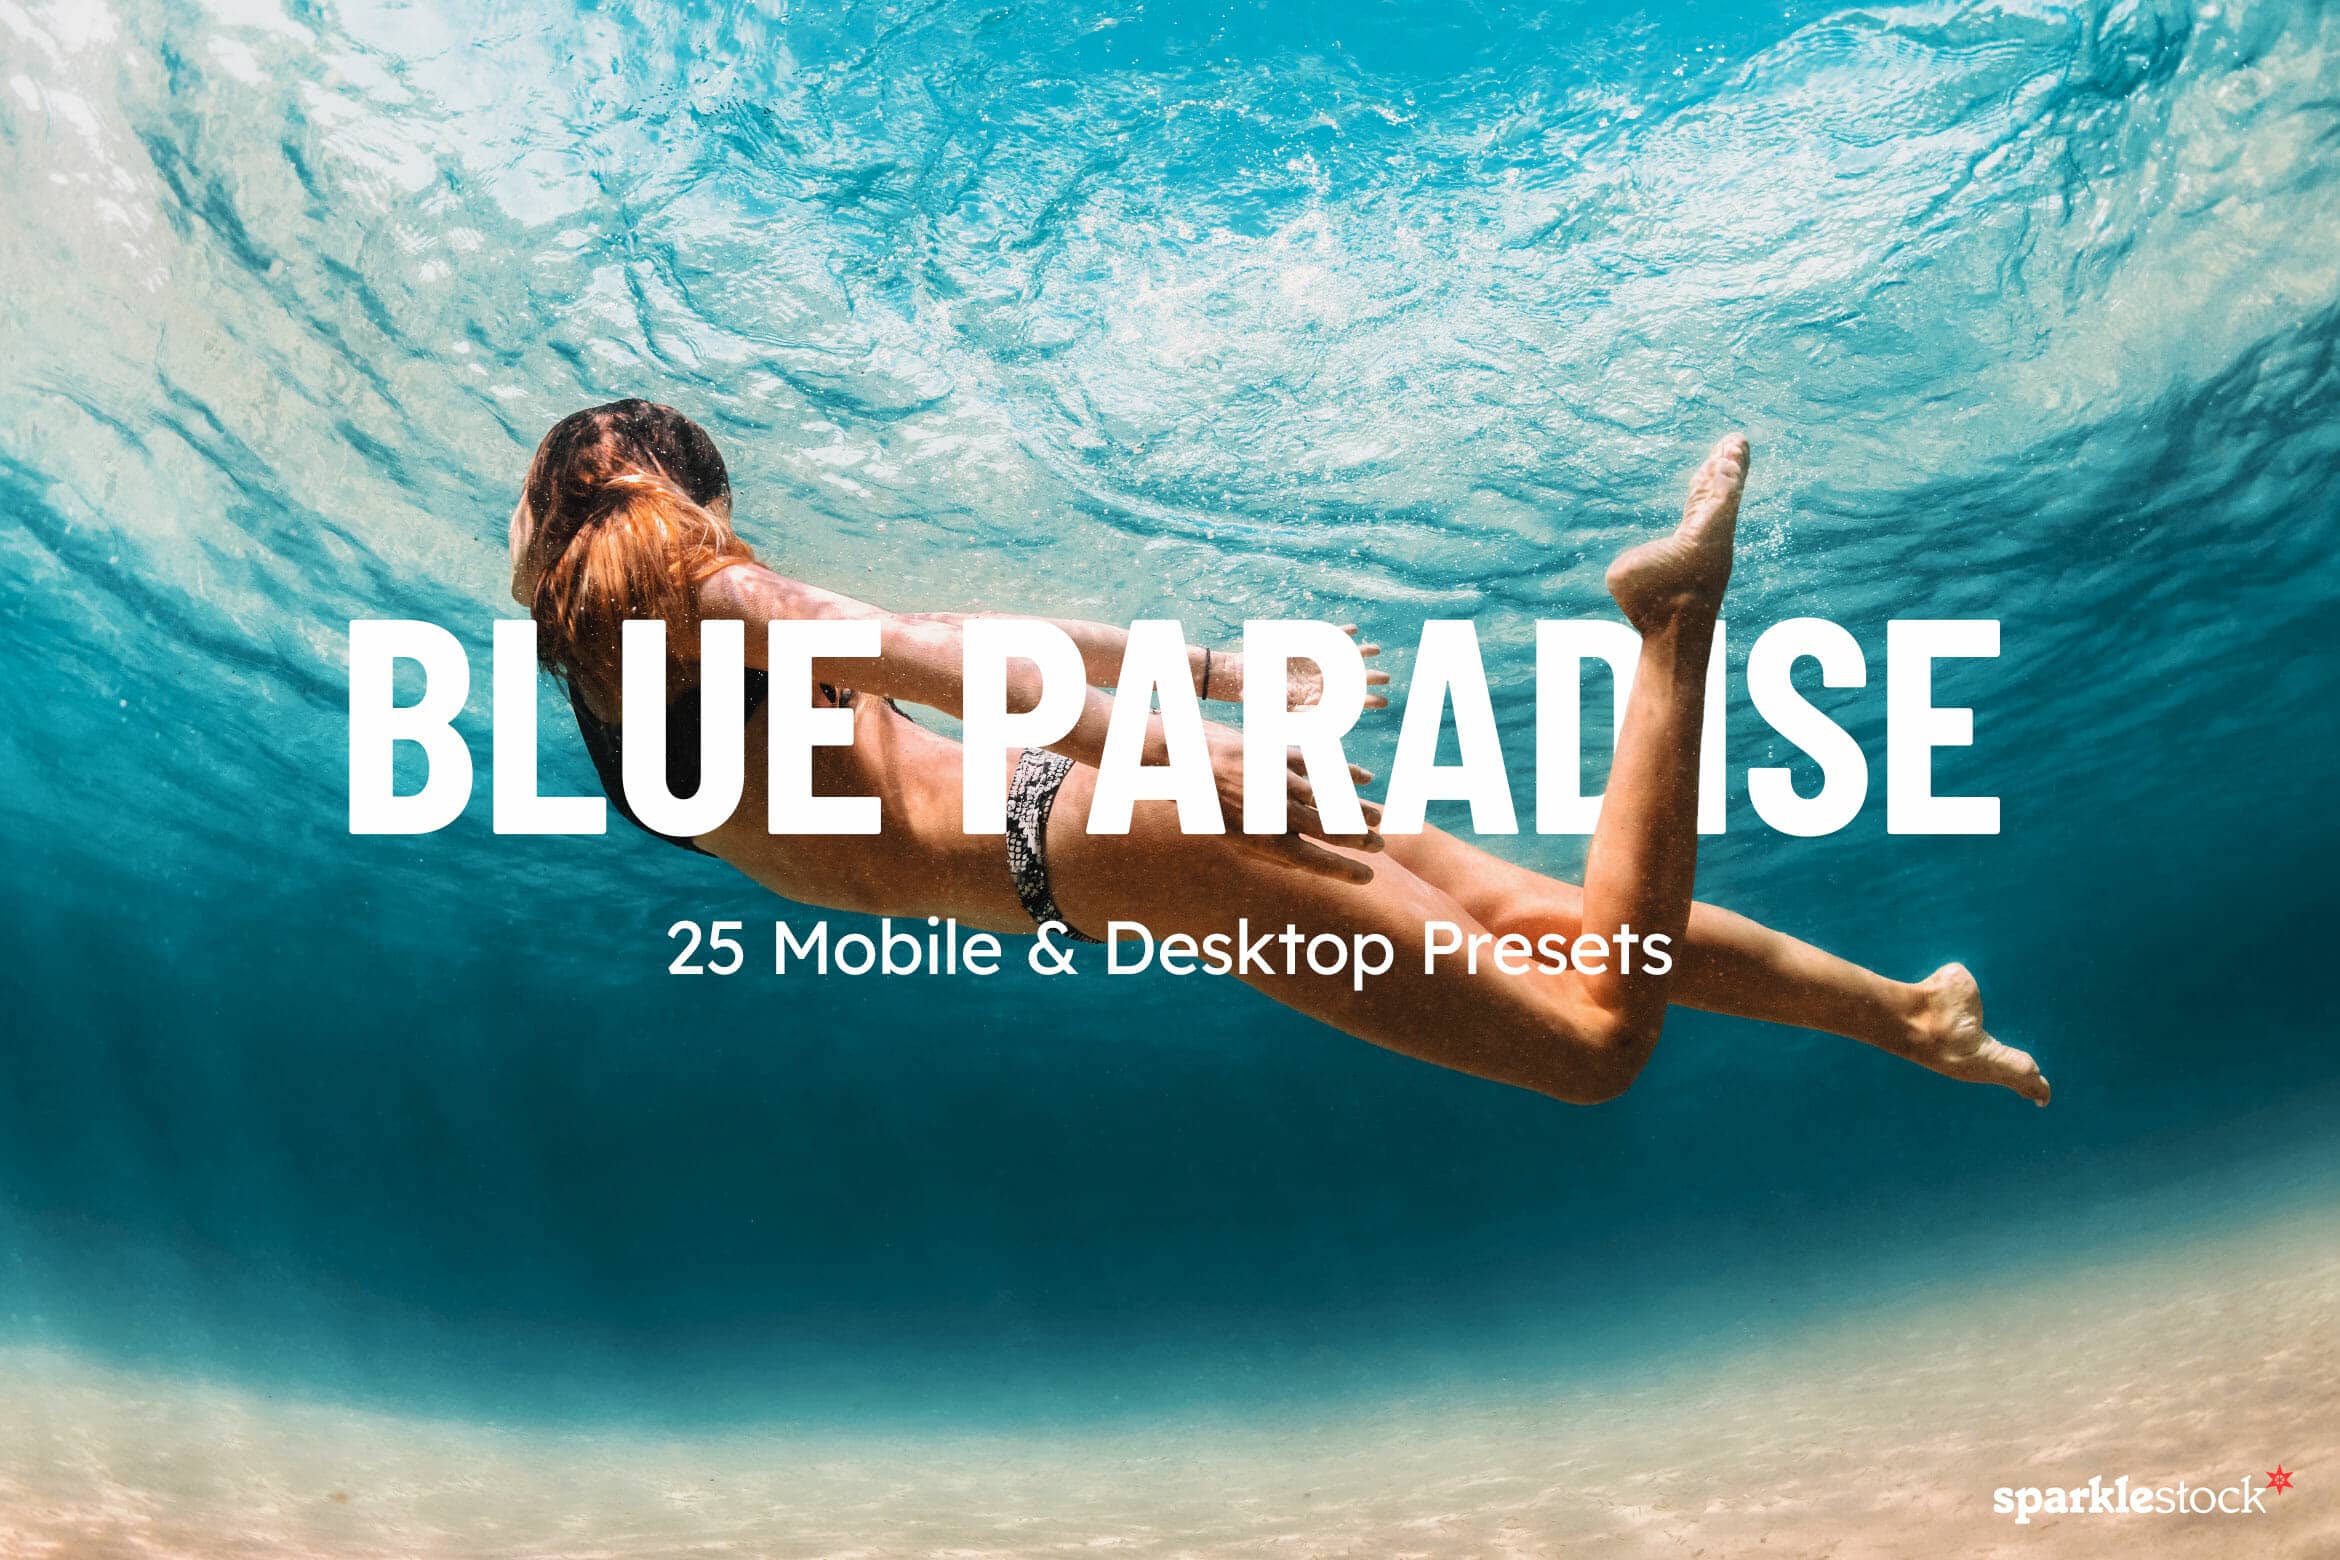 10 Free Blue Paradise Lightroom Presets and LUTs